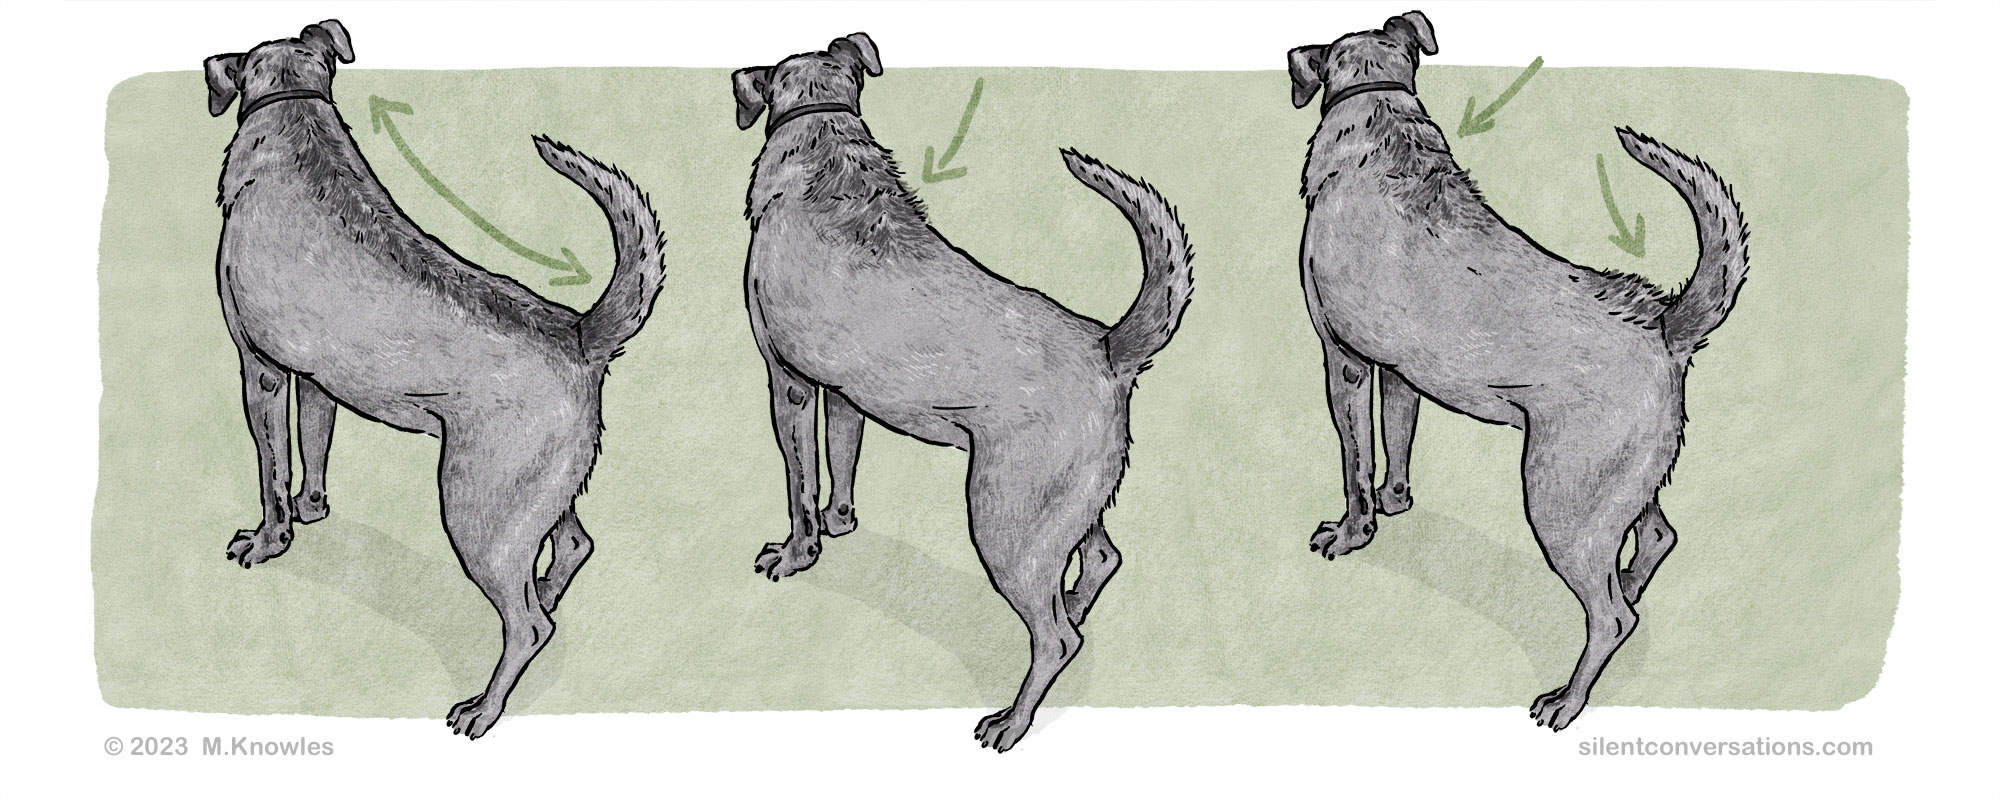 piloerection raised hackles shown in 3 patterns across dogs back